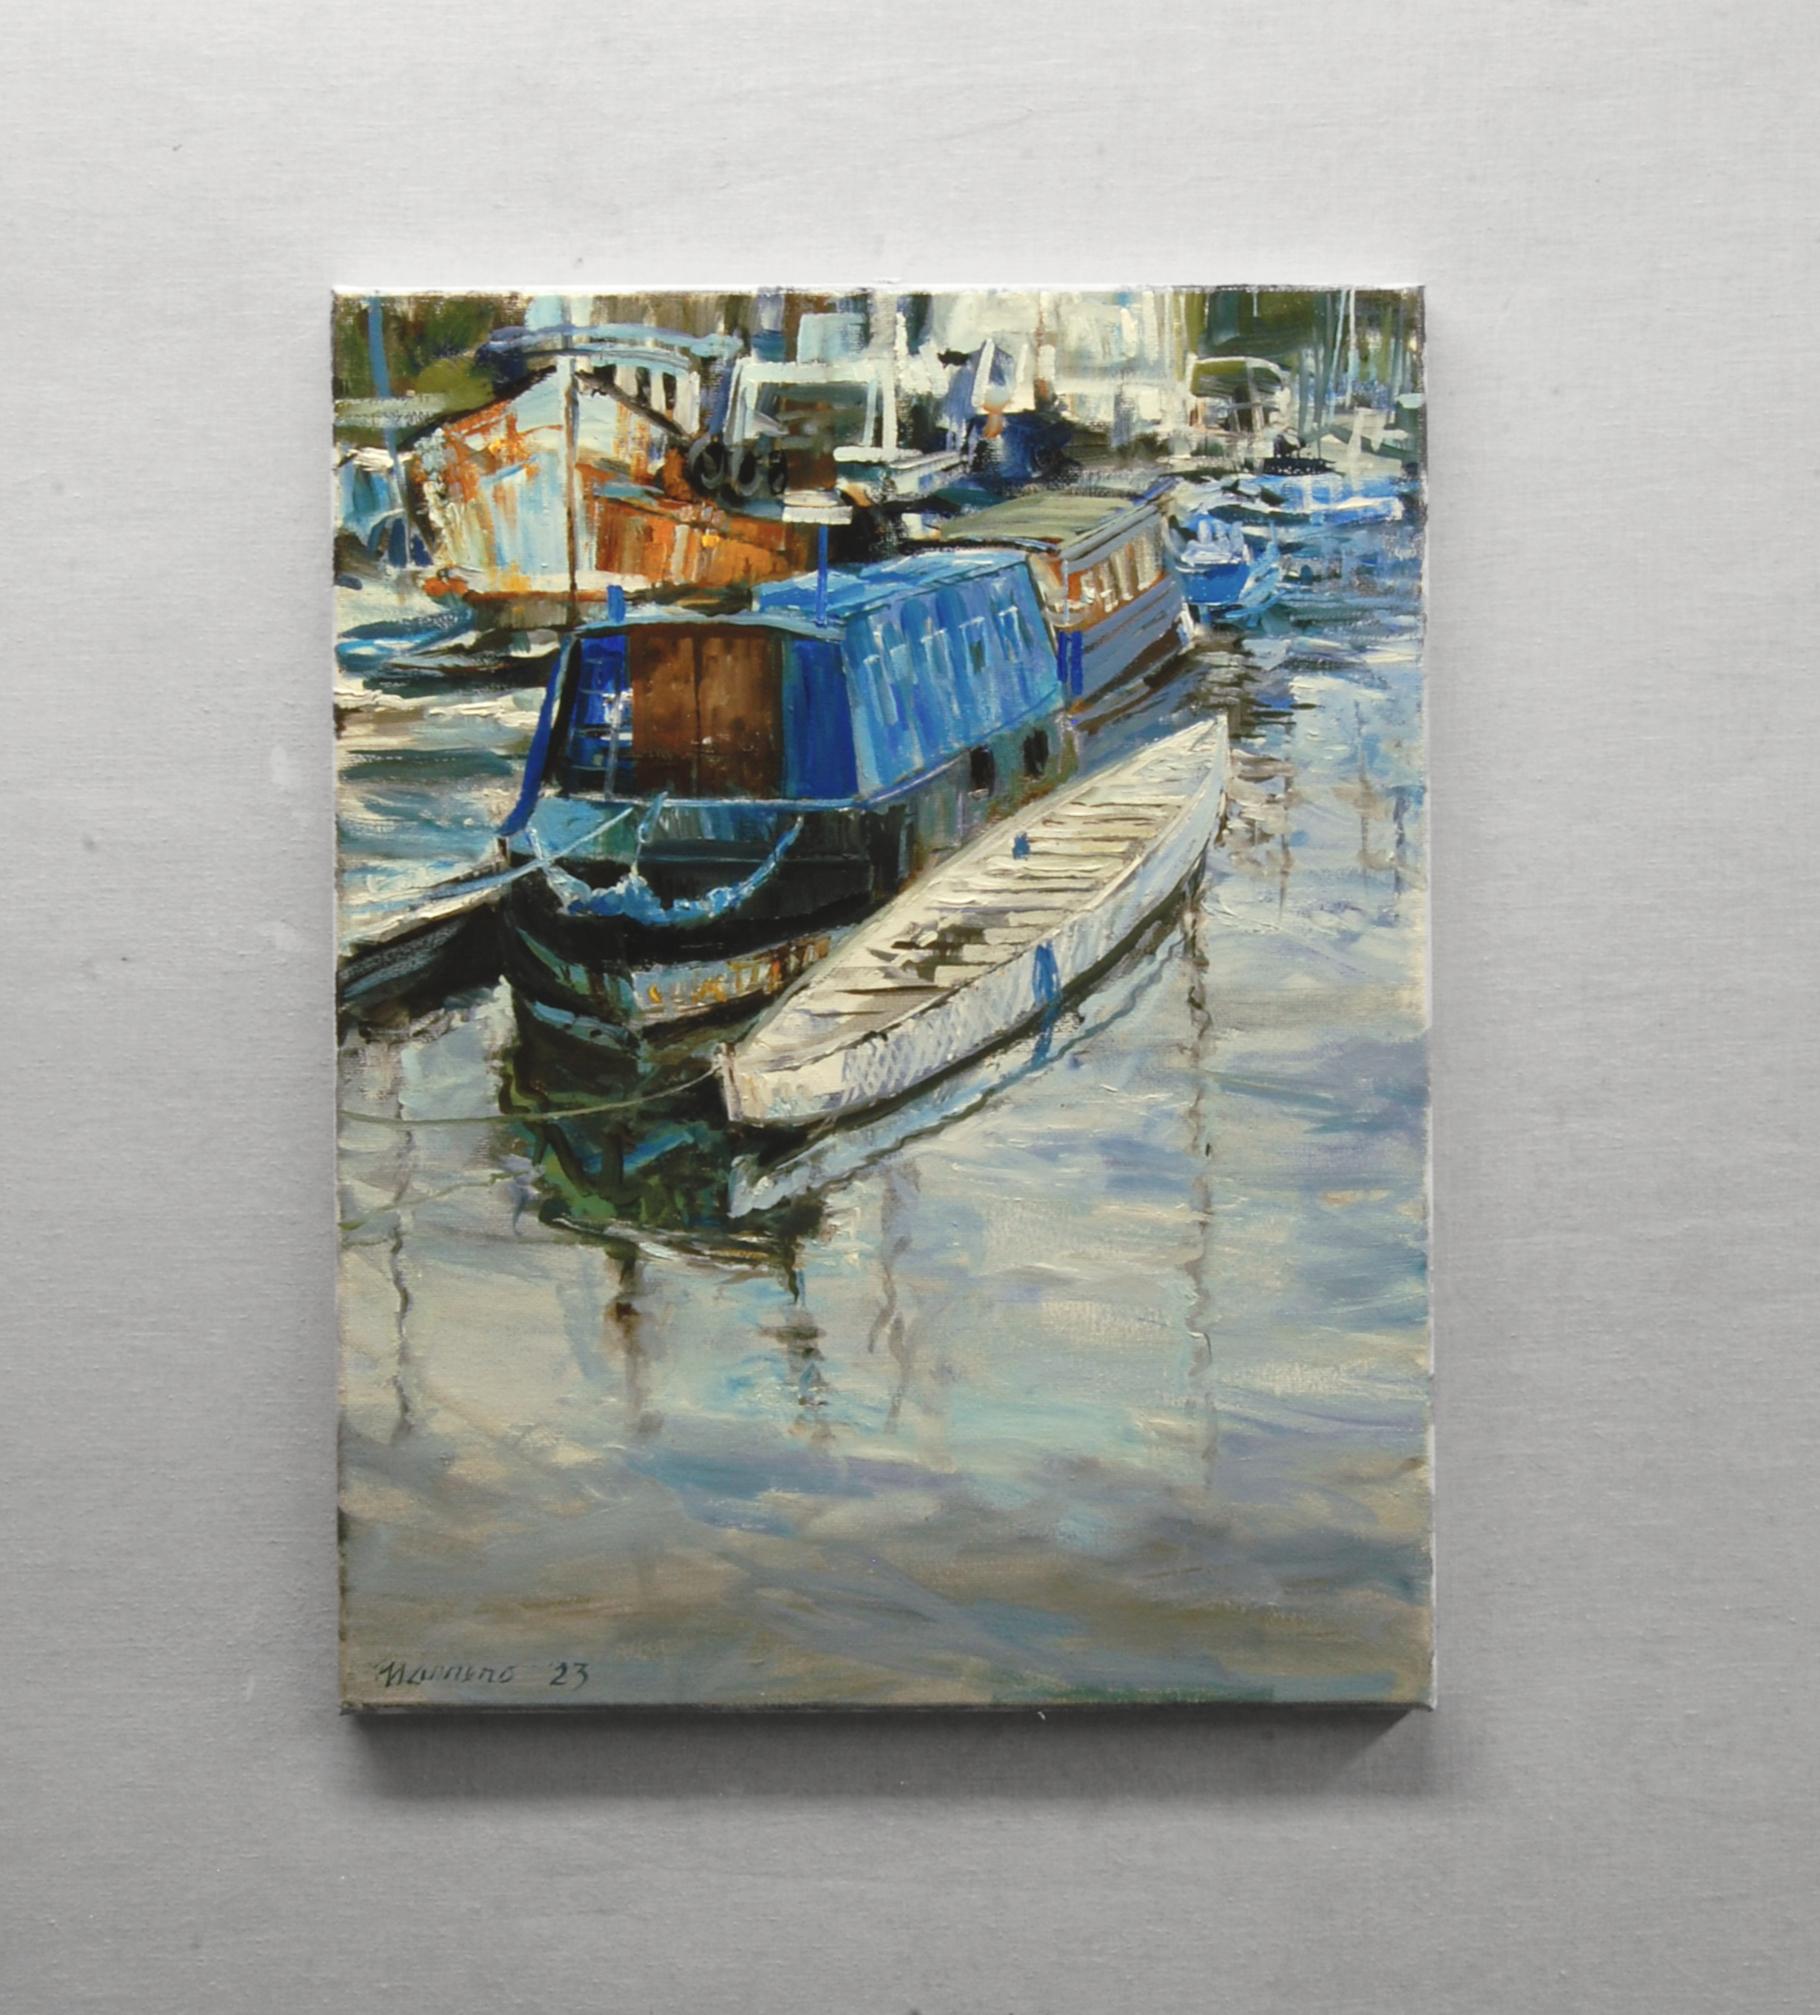 <p>Artist Comments<br>Inspired by a stroll around Waterford, Ireland, this painting showcases an array of boats lined along the pier. A houseboat stands out prominently in the composition, distinguished by its vibrant blue color. Bold strokes unify